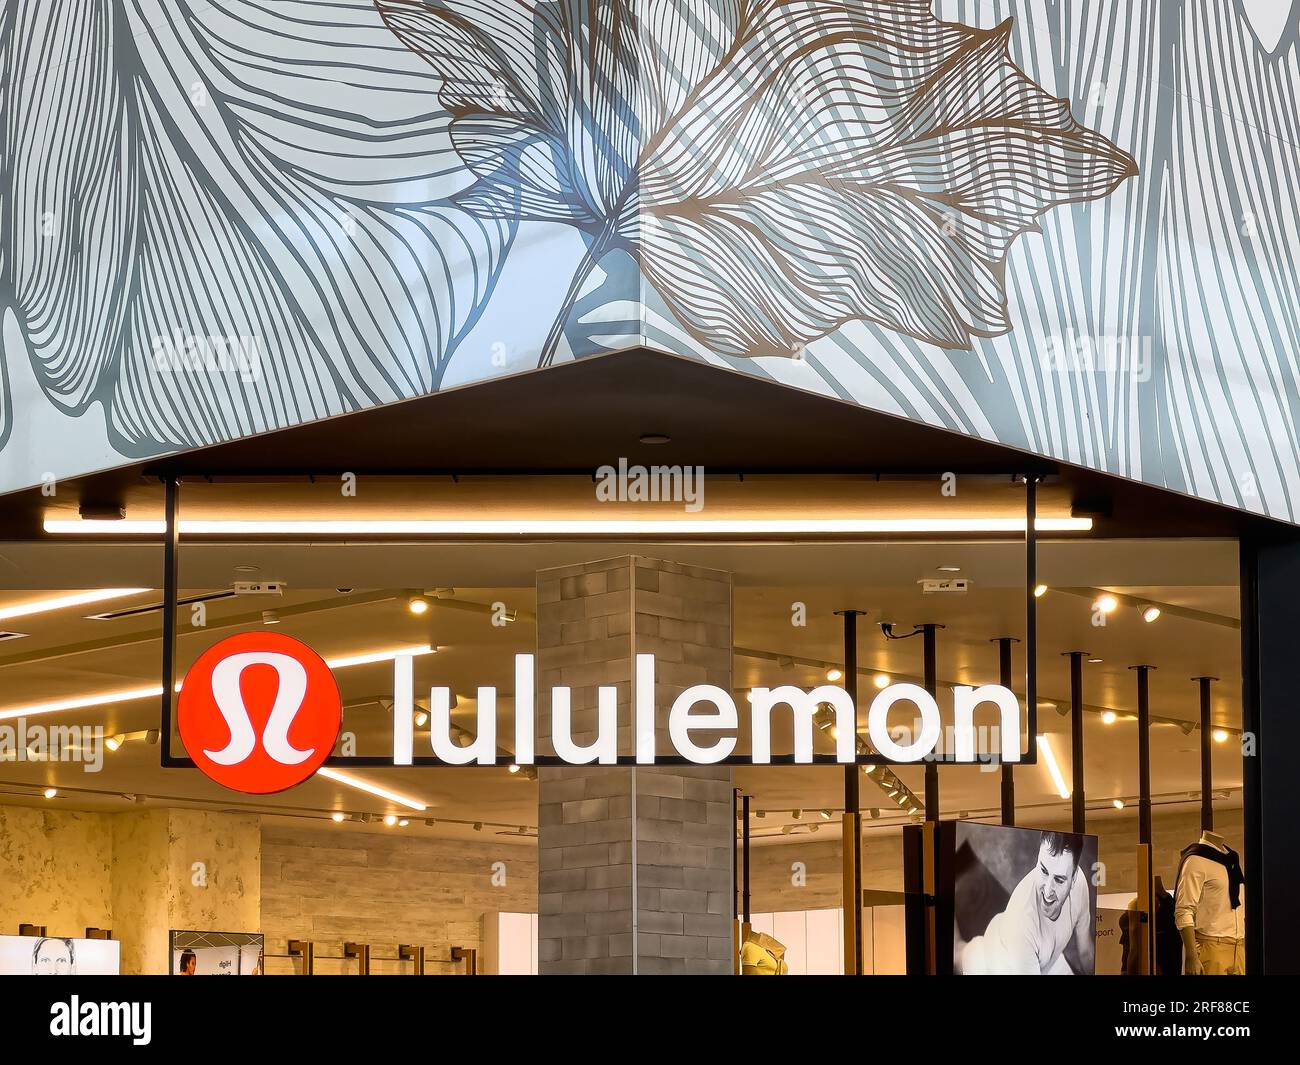 https://c8.alamy.com/comp/2RF88CE/toronto-canada-yorkdale-mall-logo-or-sign-of-lululemon-in-a-store-inside-of-the-commercial-center-lululemon-athletica-inc-is-a-canadian-multinat-2RF88CE.jpg